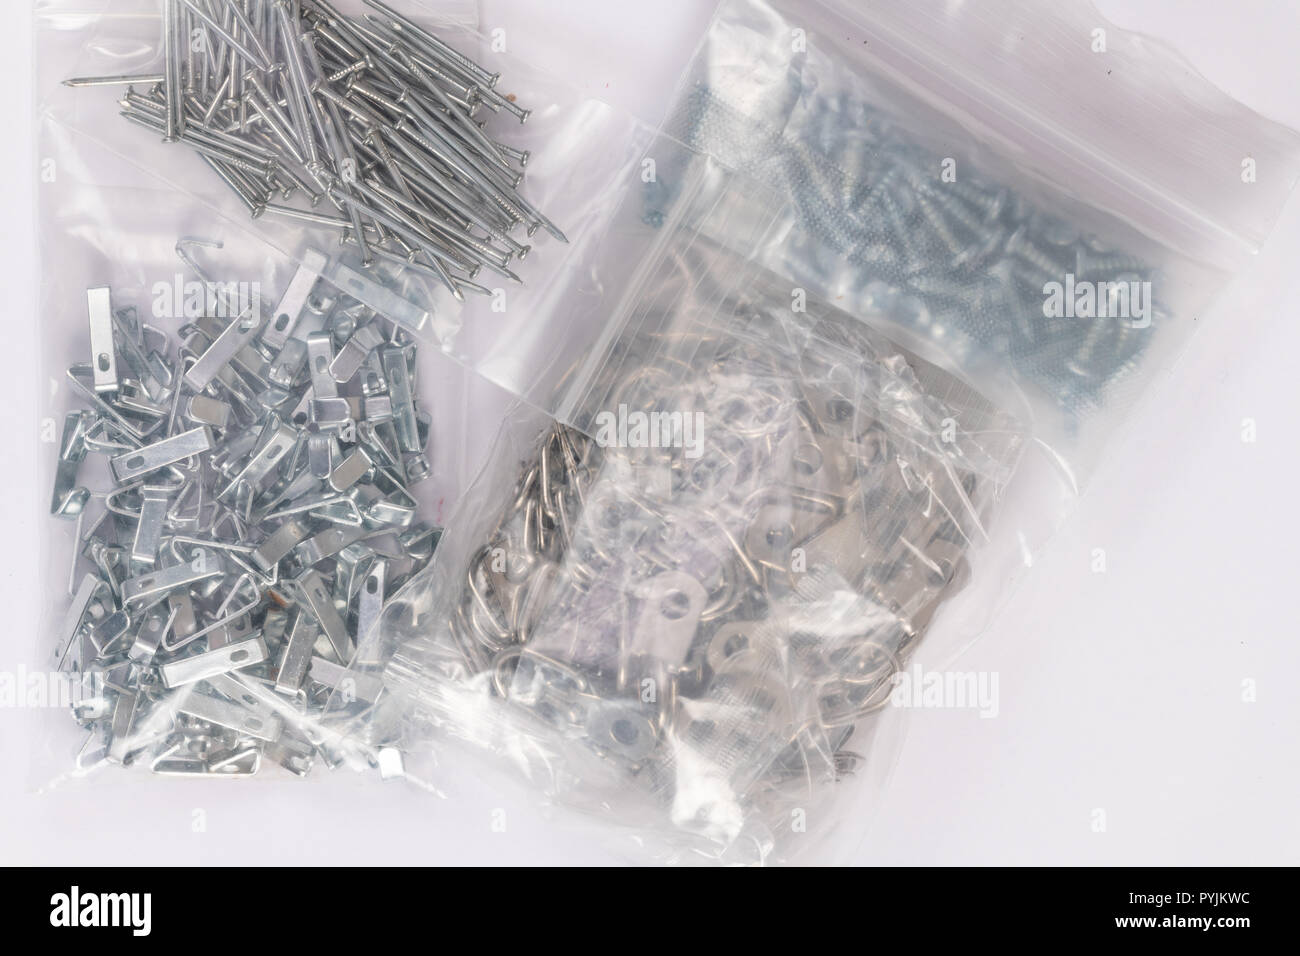 Groups of frame hanging metal plates, hooks, and nails isolated on white. frame hanging metal plates, hooks, nails, and screws in plastic packages iso Stock Photo